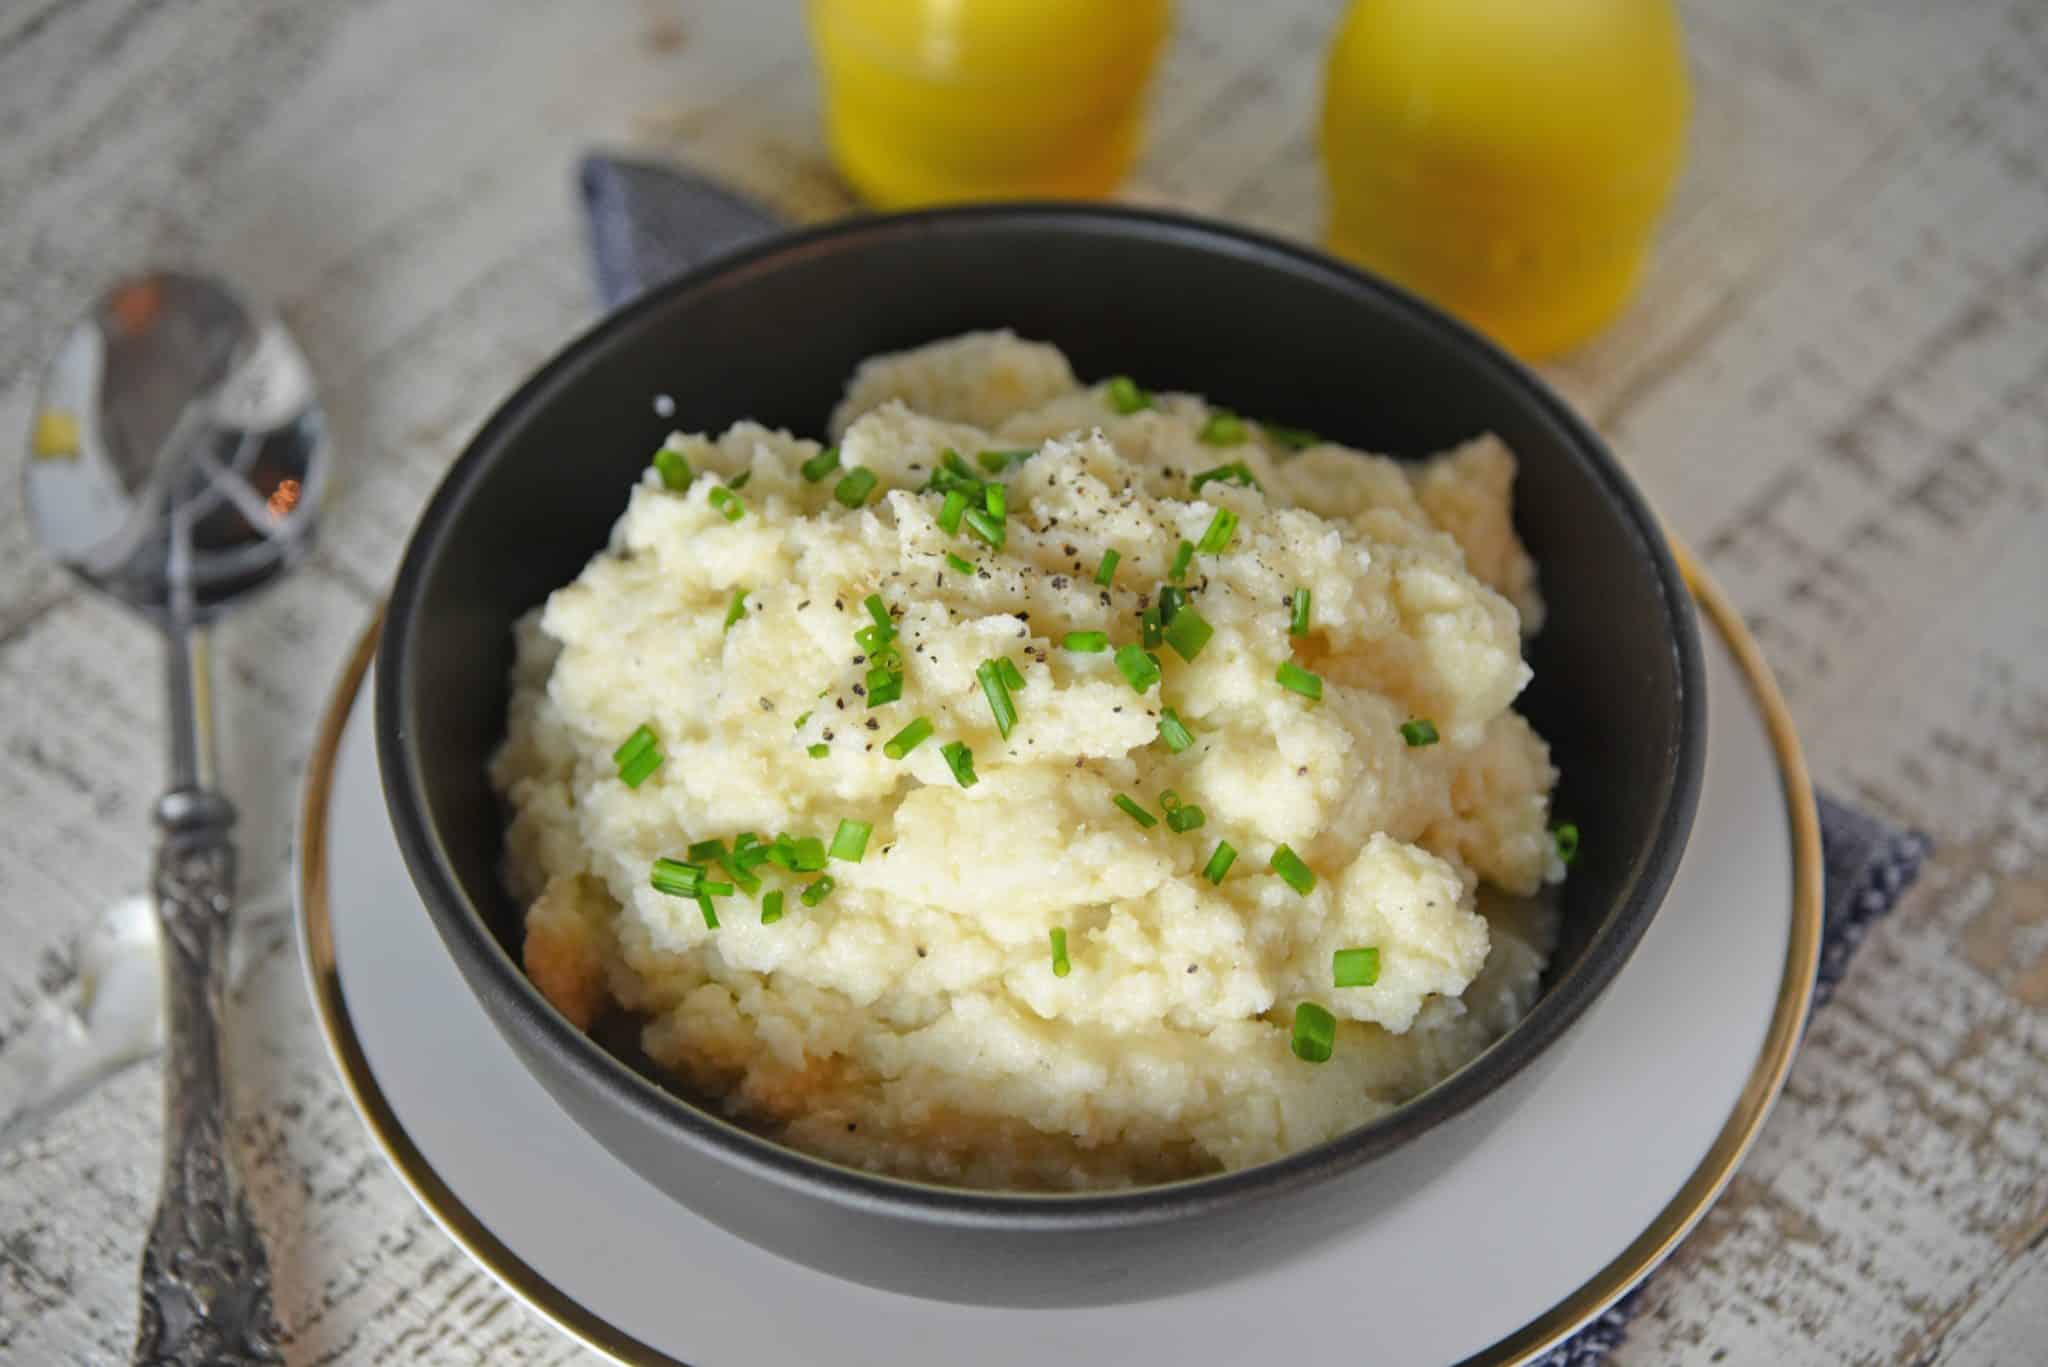 Mashed Cauliflower is a healthier alternative to mashed potatoes, with fewer carbs! This Mashed Cauliflower recipe is perfectly smooth and creamy! #mashedcauliflower #cauliflowermashedpotatoes www.savoryexperiments.com